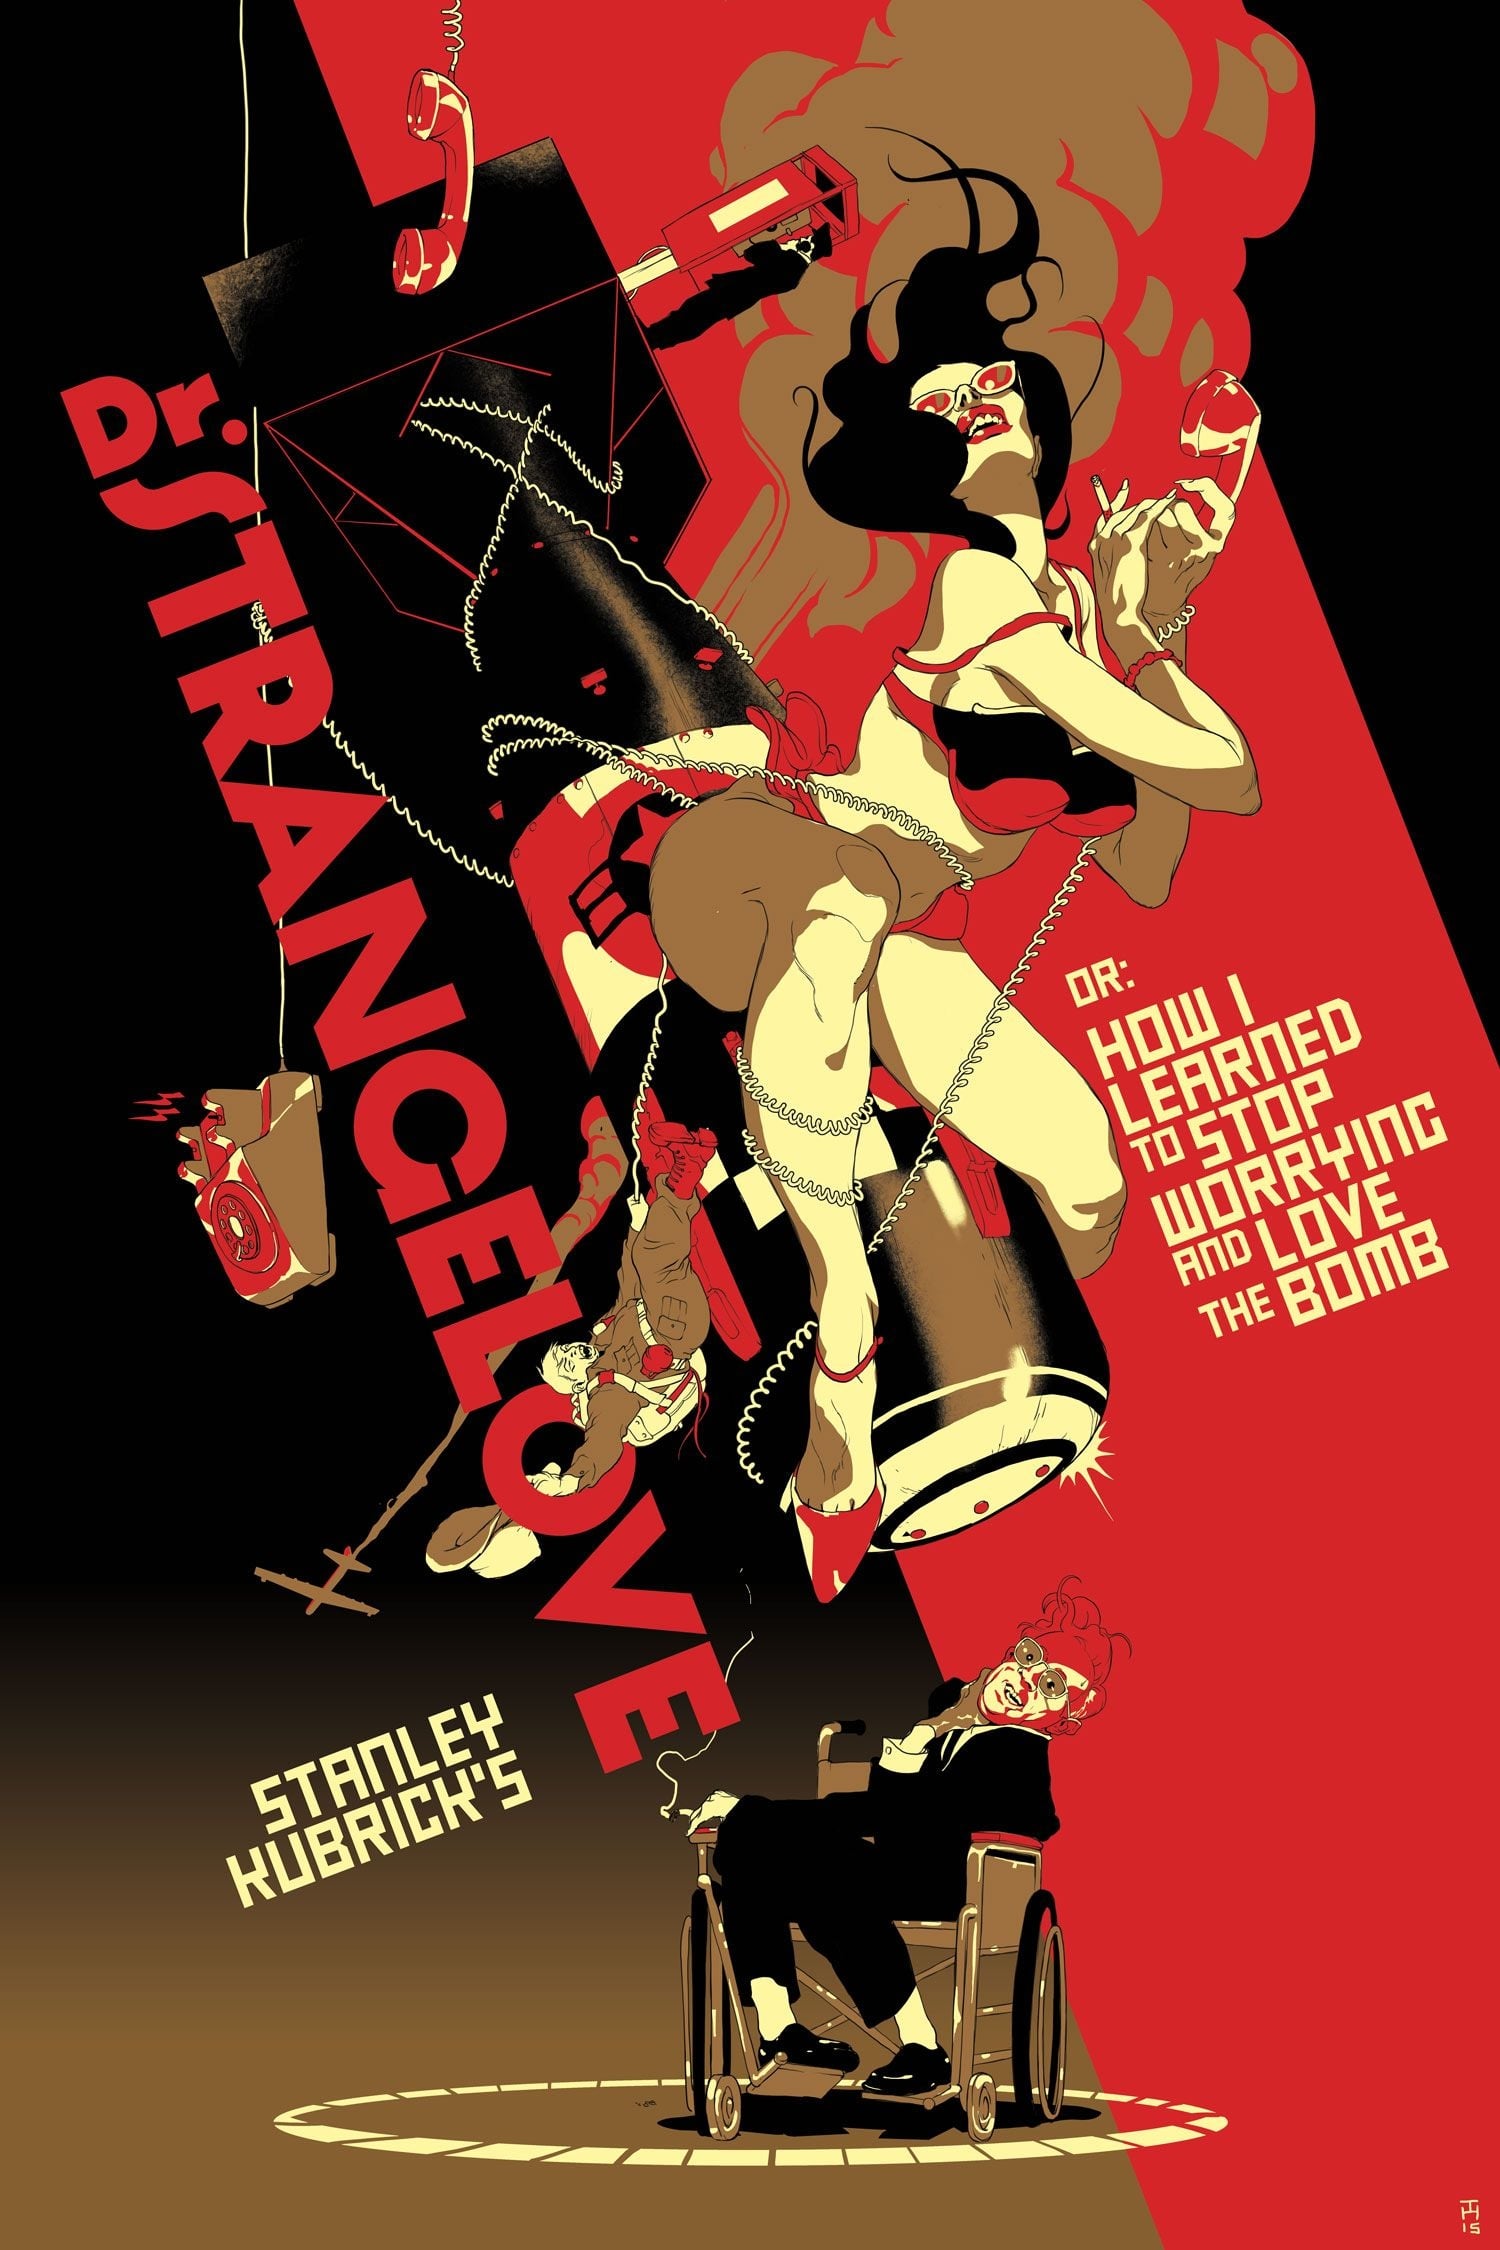 Dr. Strangelove or: How I Learned to Stop Worrying and Love the Bomb Movie poster